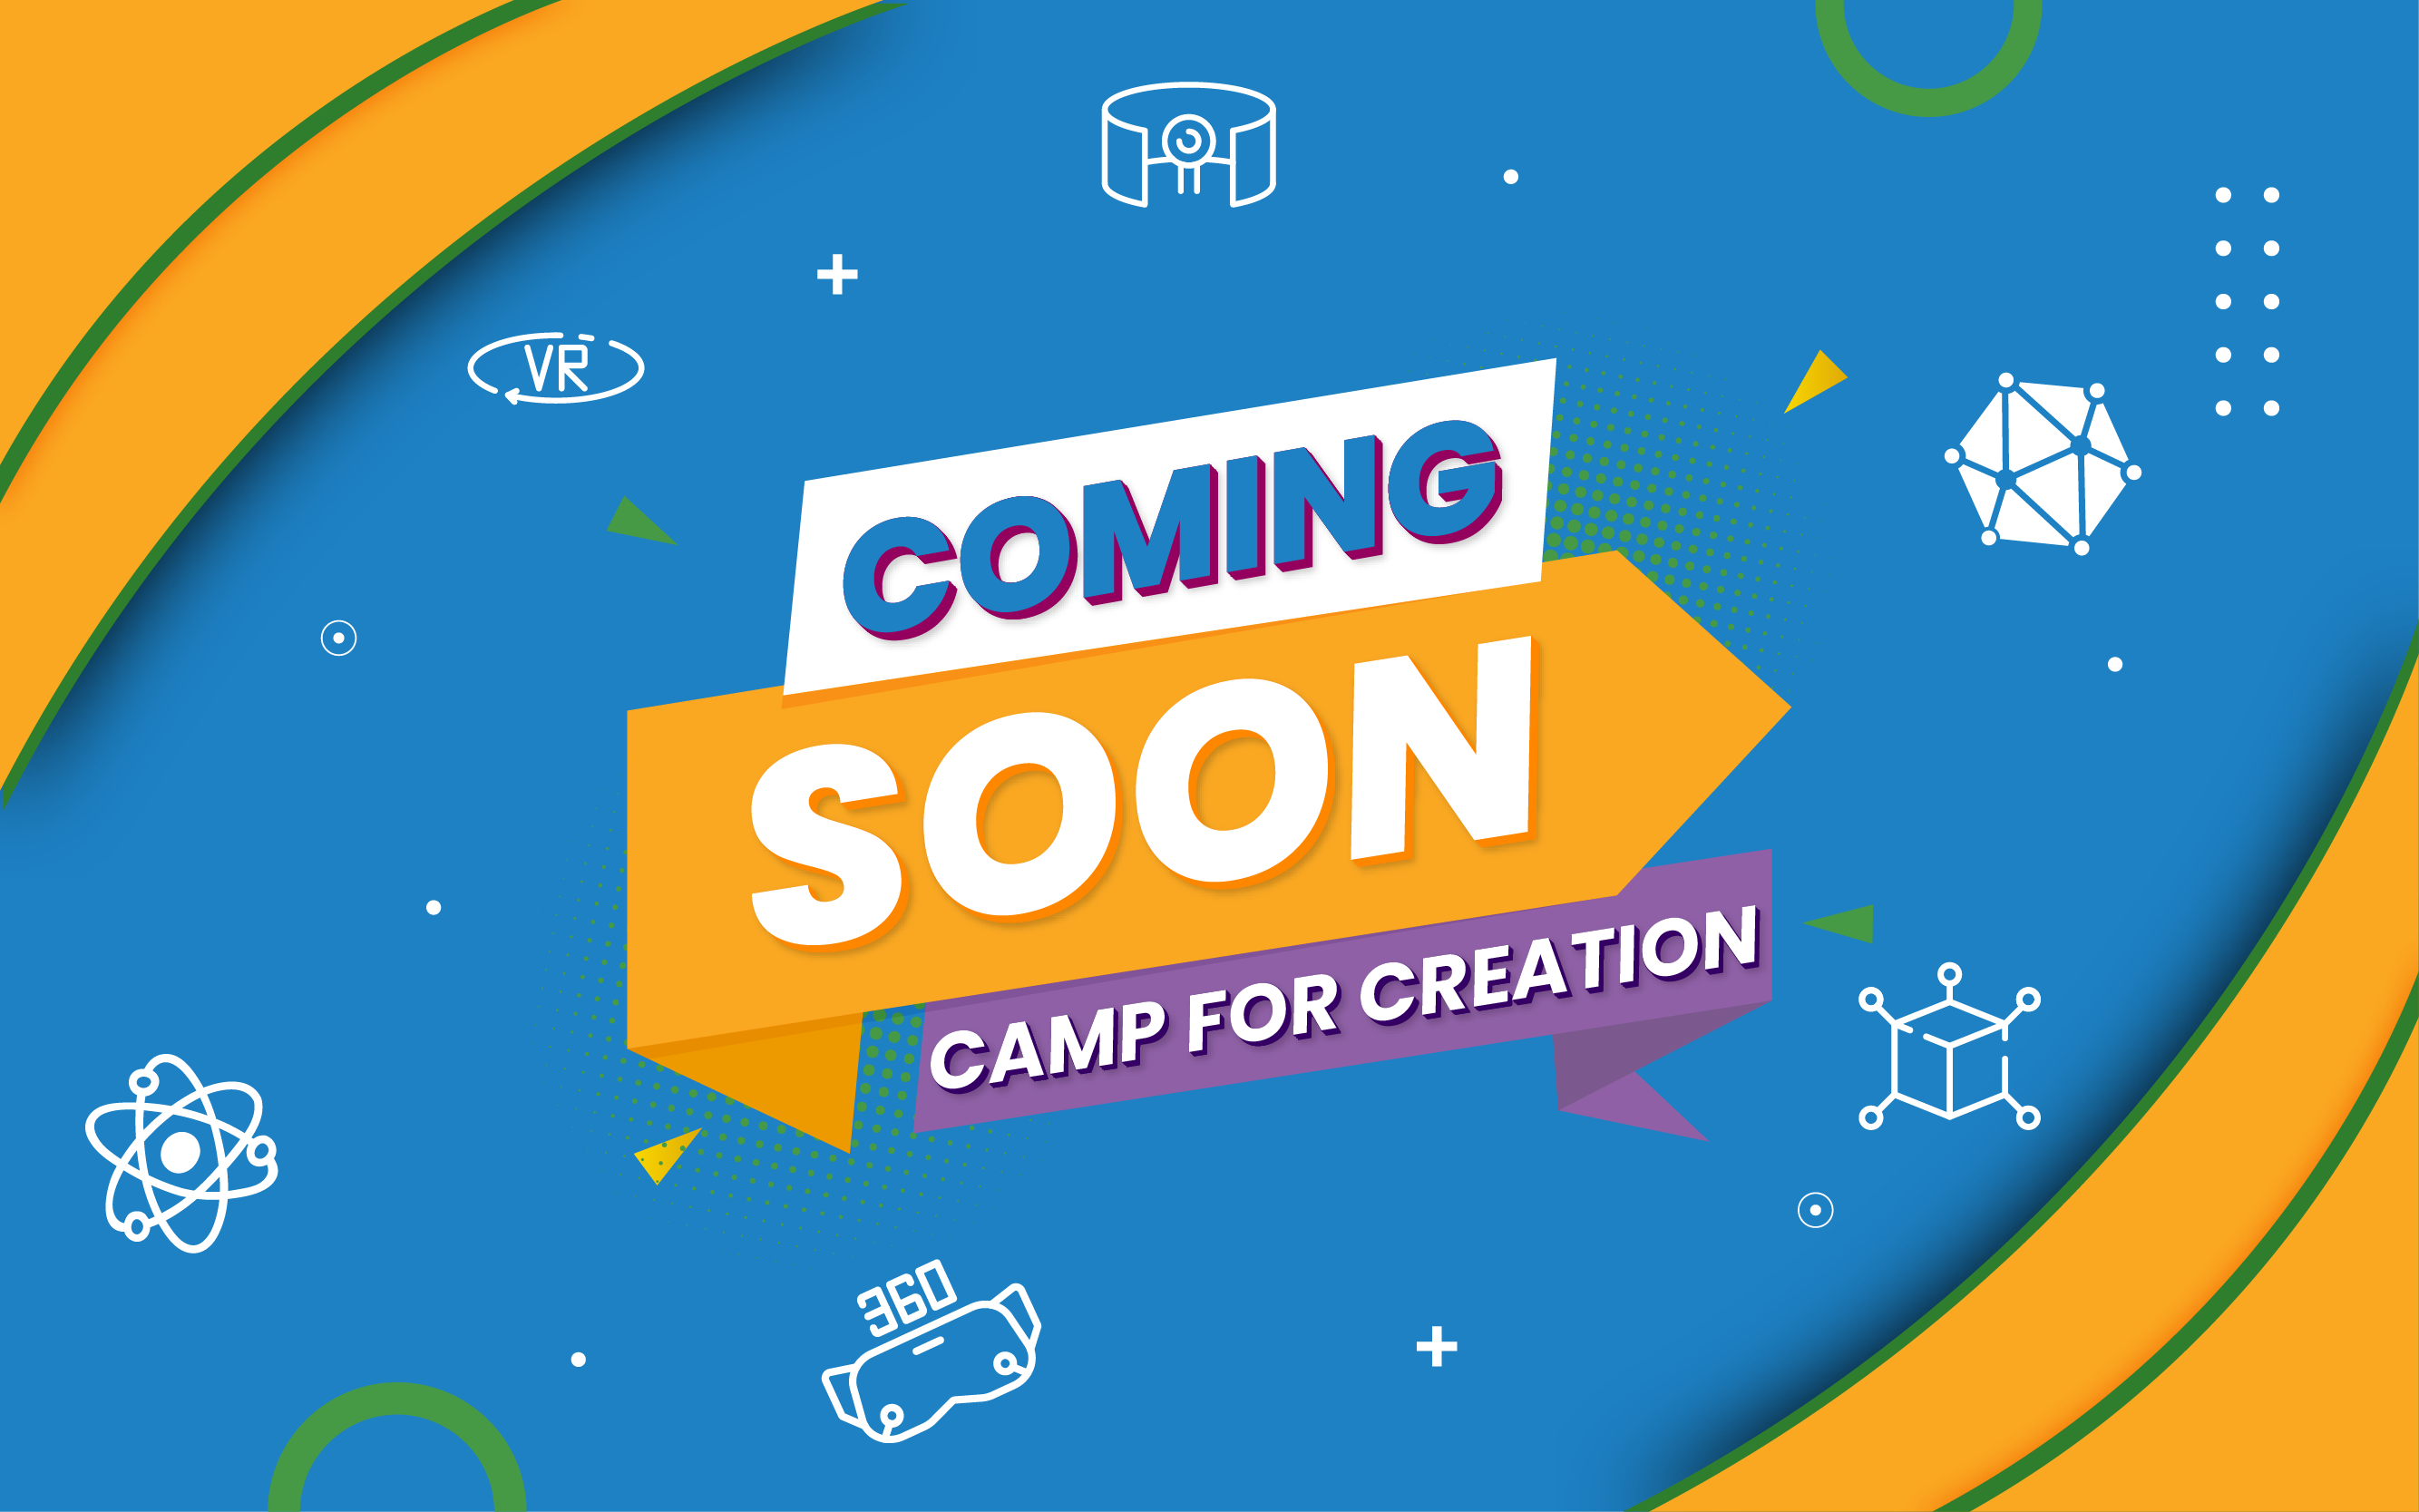 Coming soon: Camp for Creation